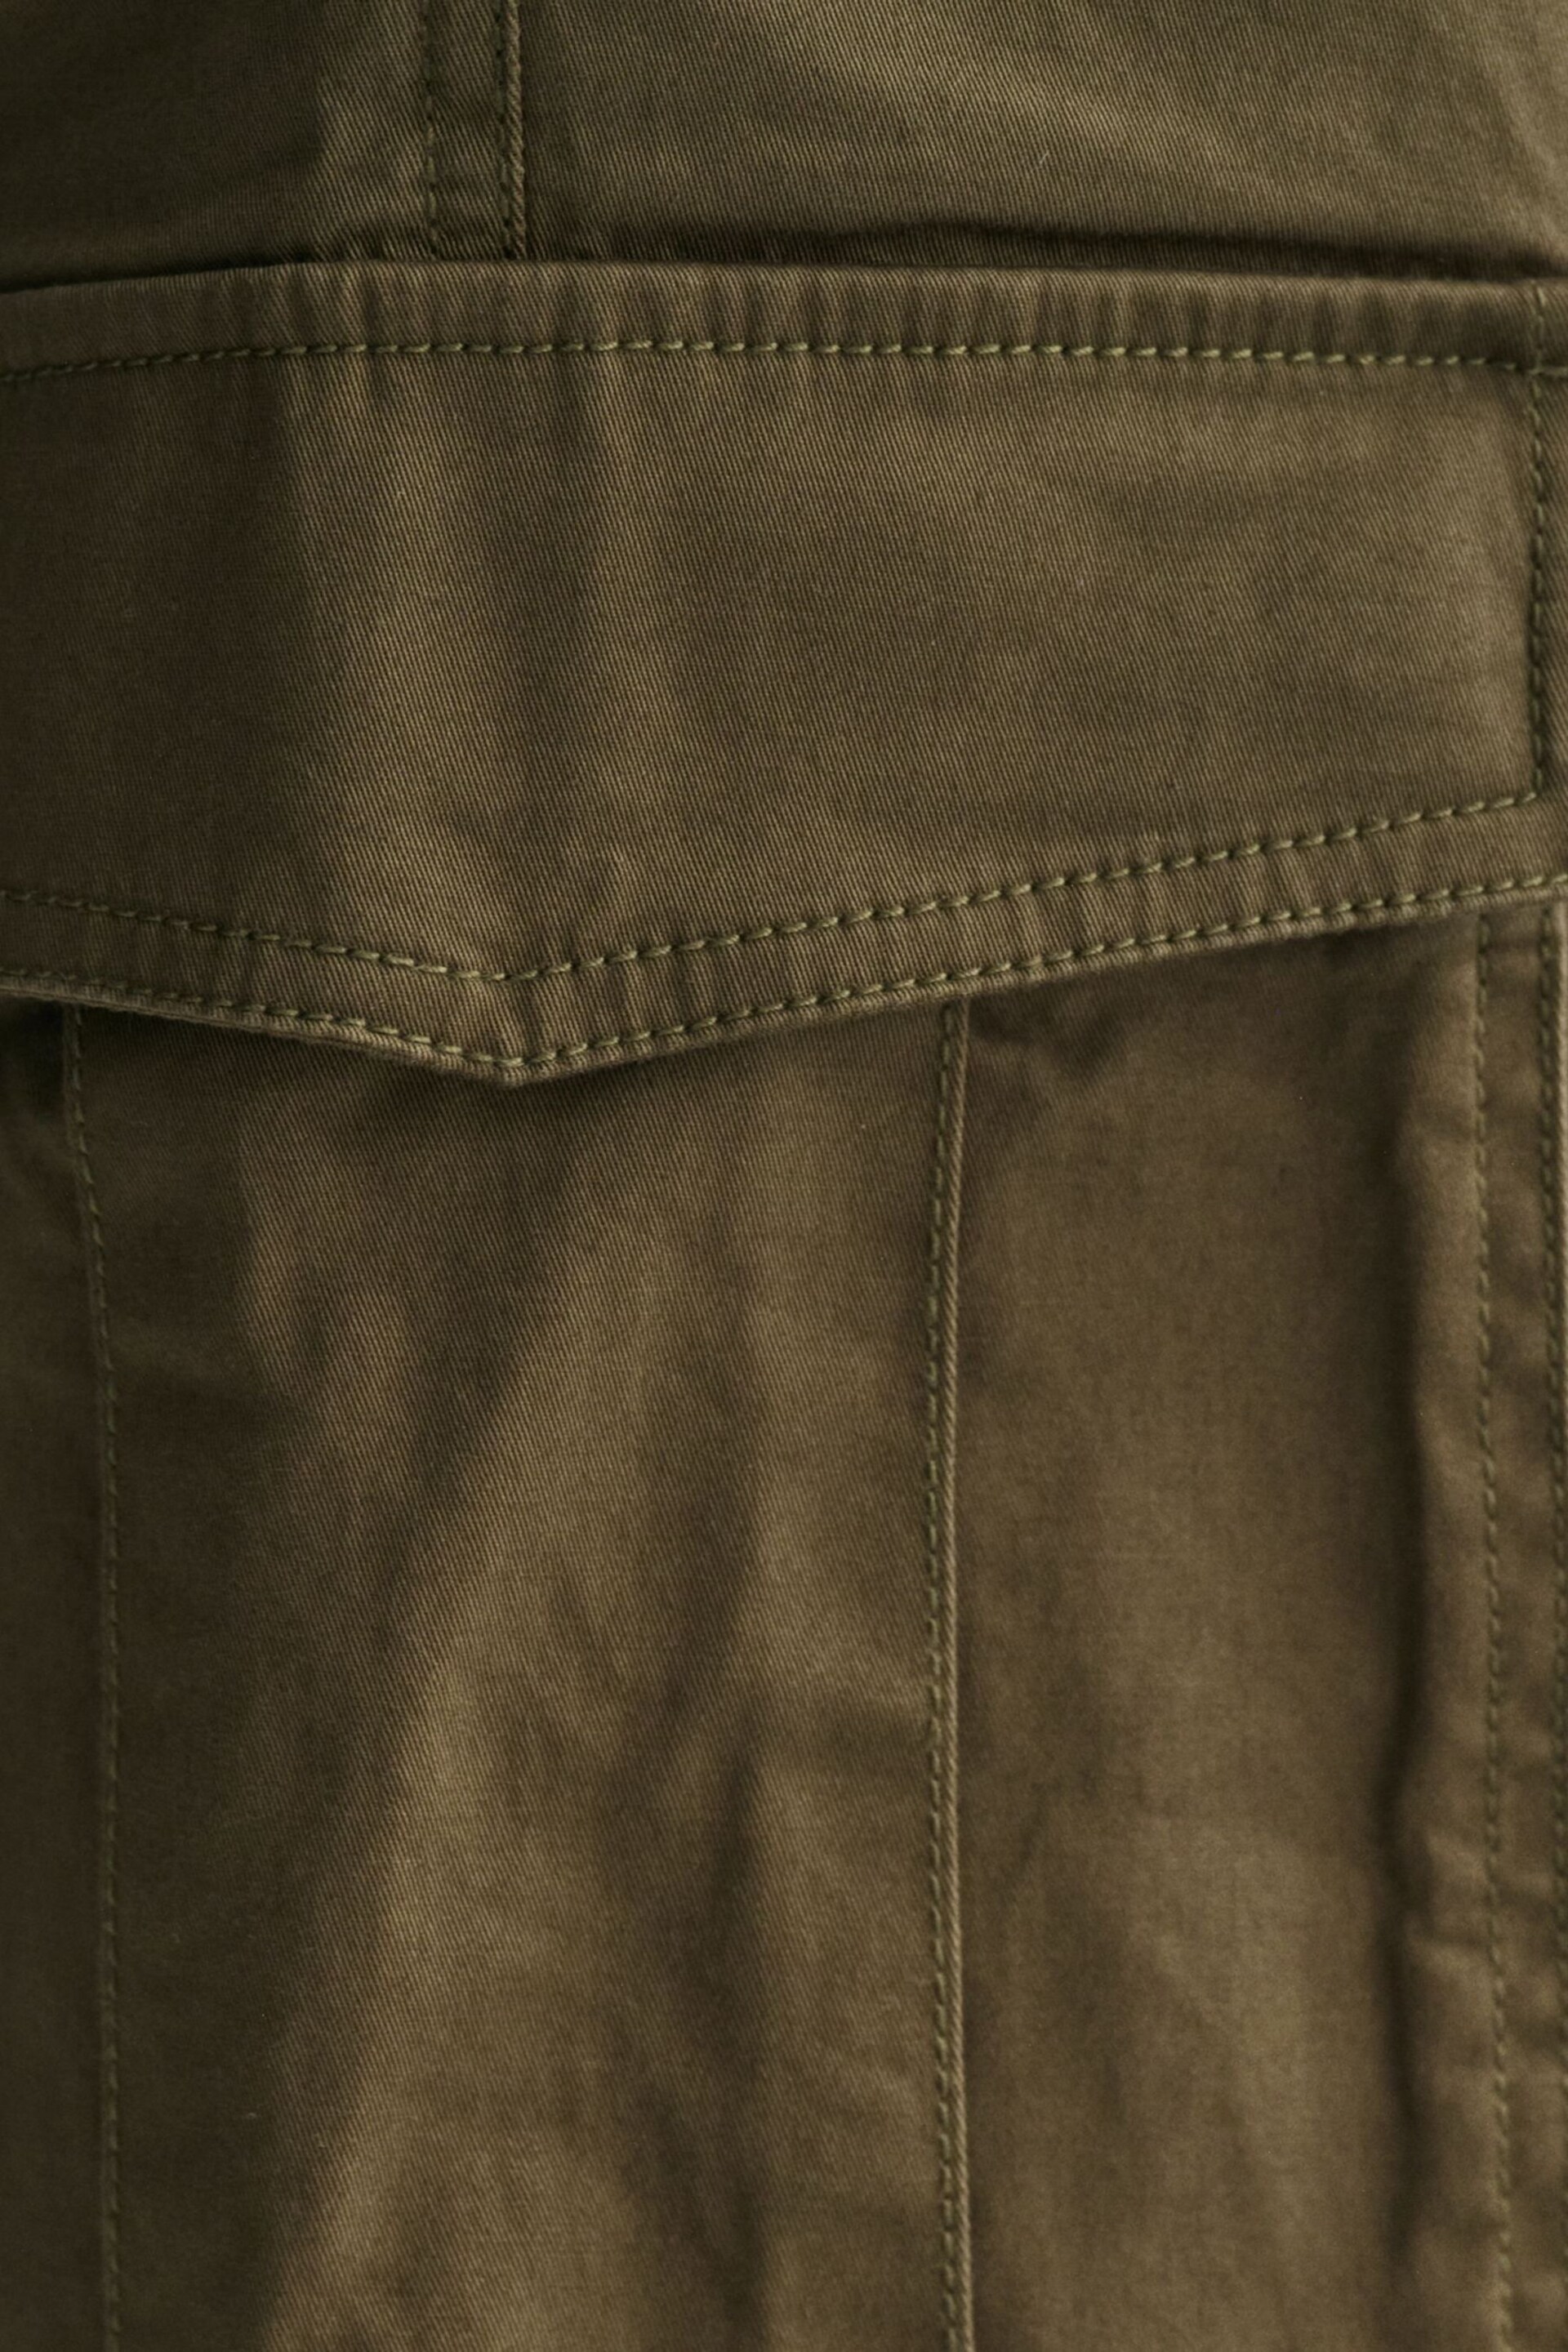 GANT Green Relaxed Twill Cargo Shorts - Image 9 of 9